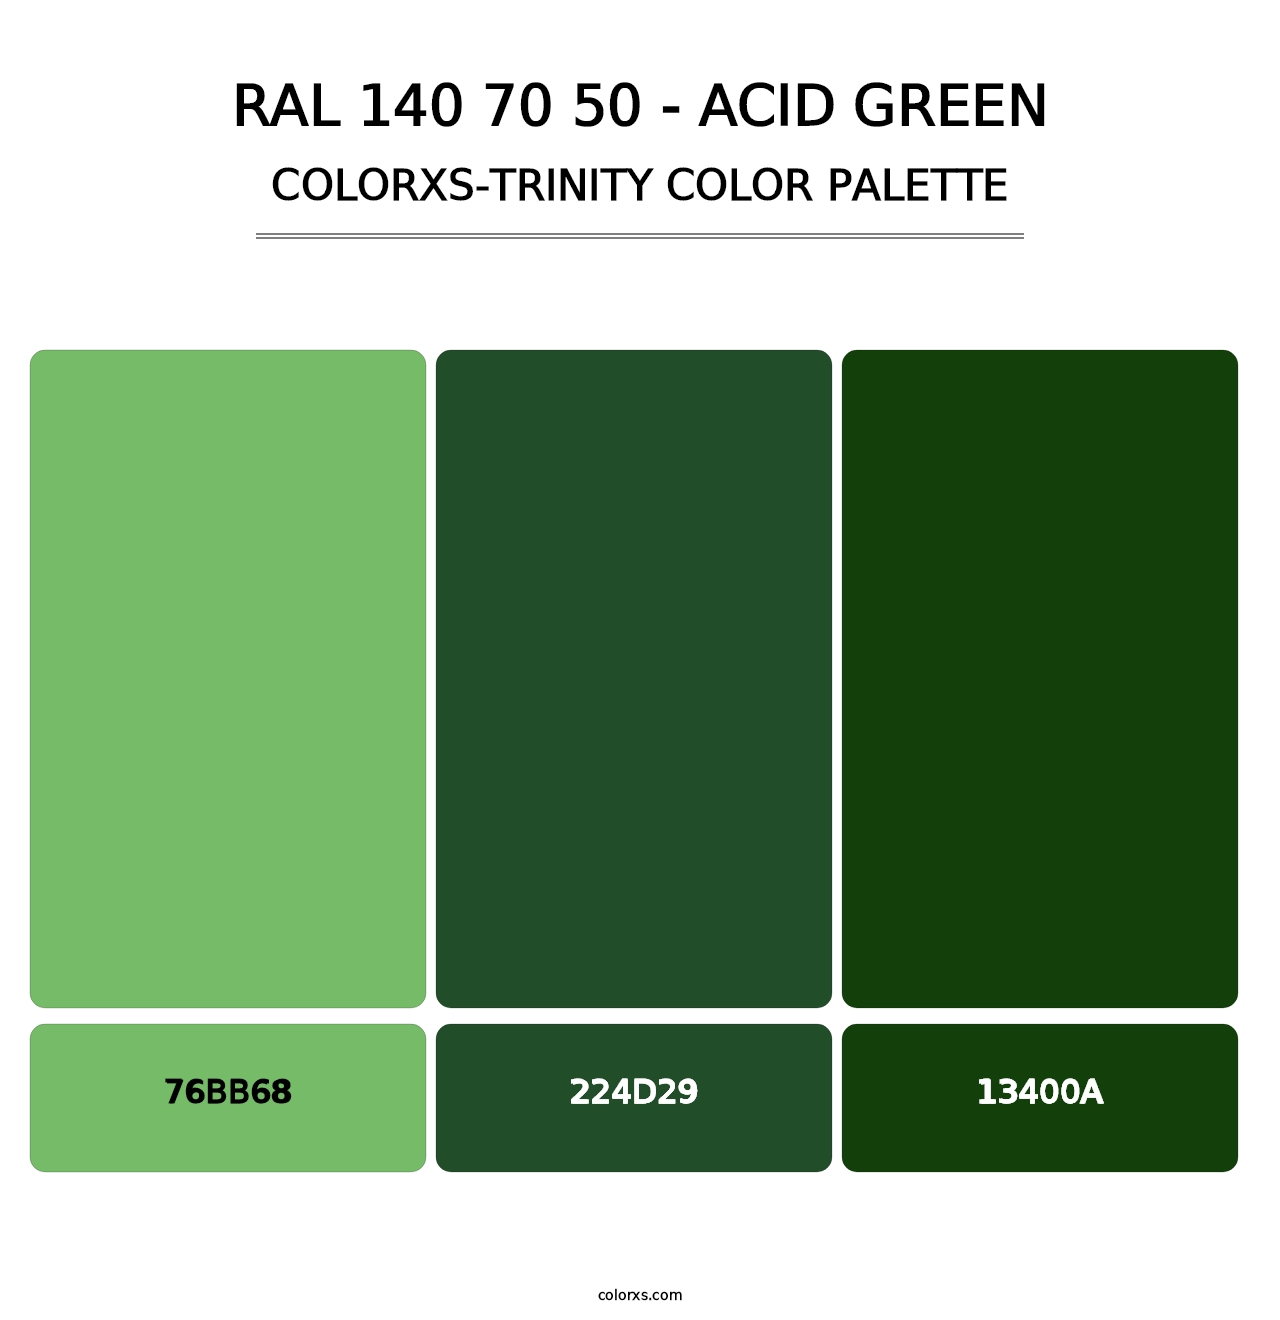 RAL 140 70 50 - Acid Green - Colorxs Trinity Palette